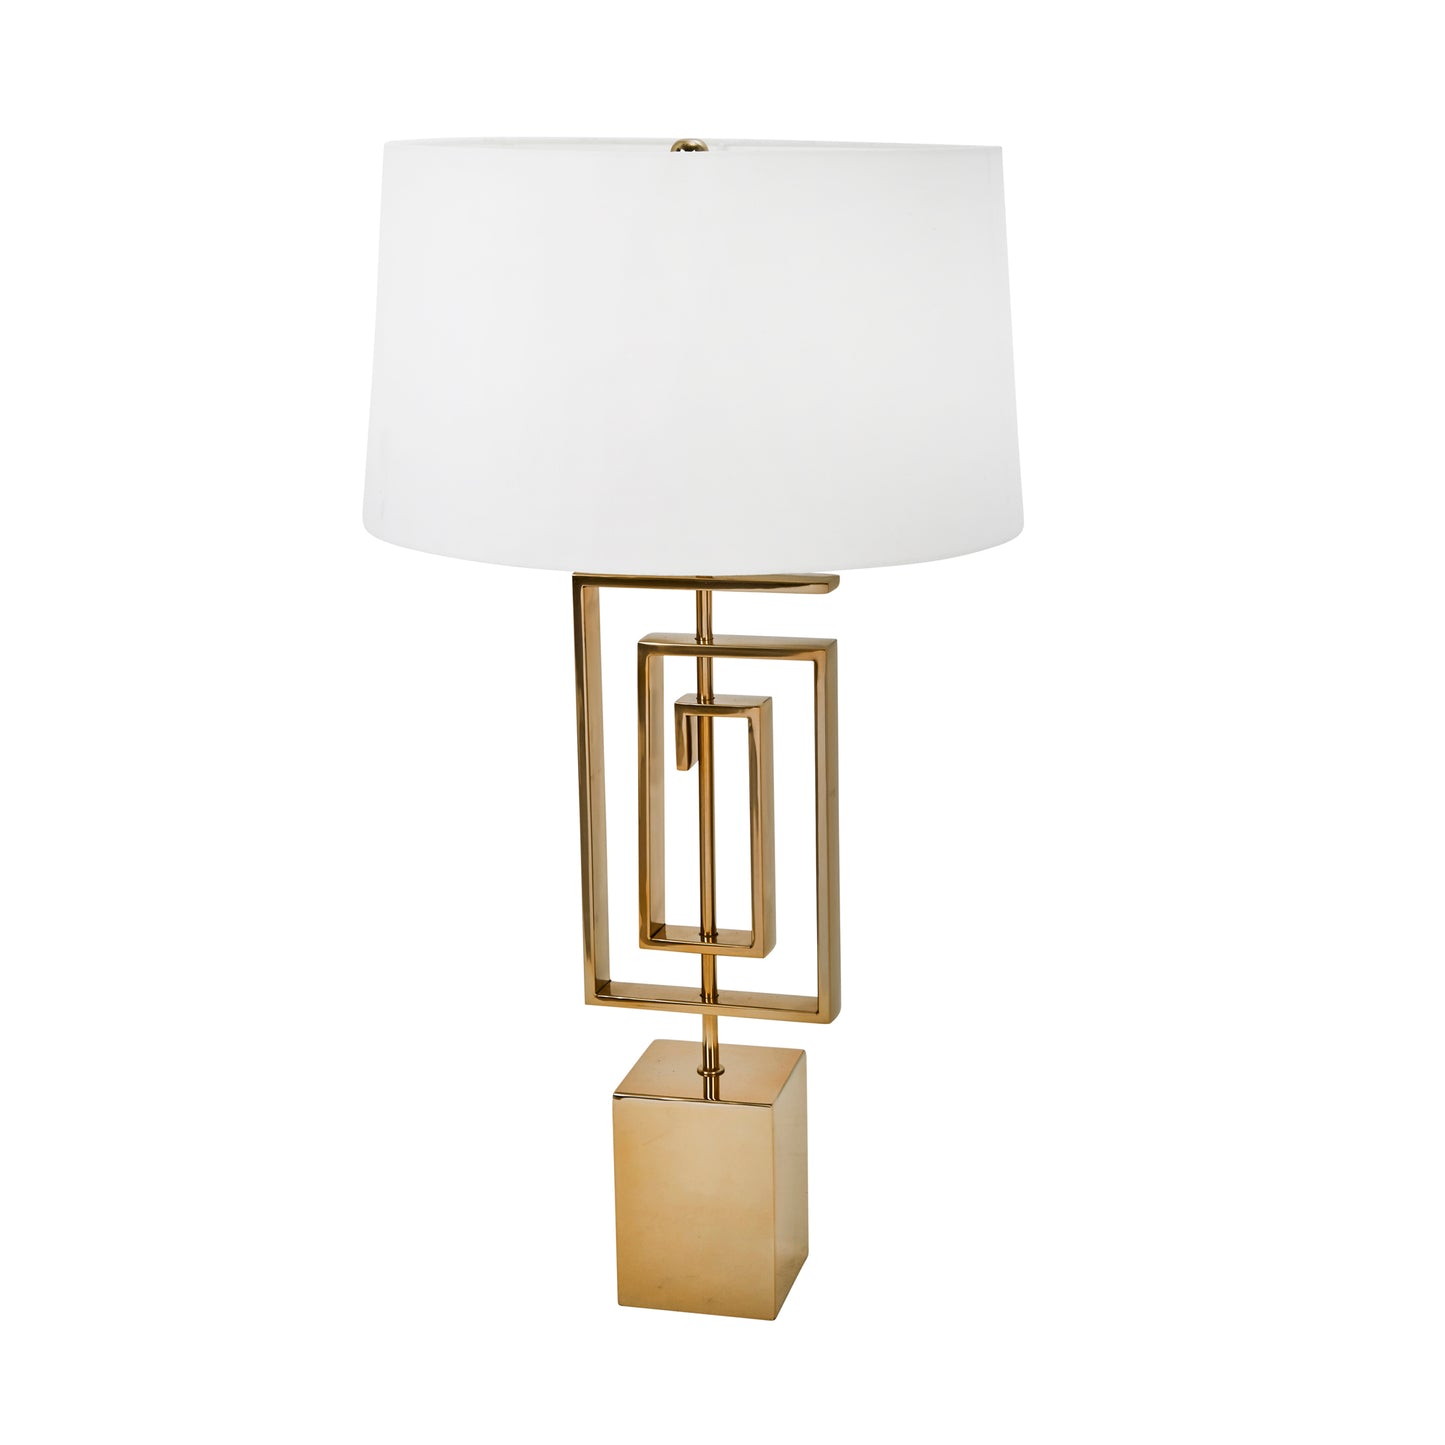 STAINLESS STEEL 37" GEOMETRICTABLE LAMP, GOLD